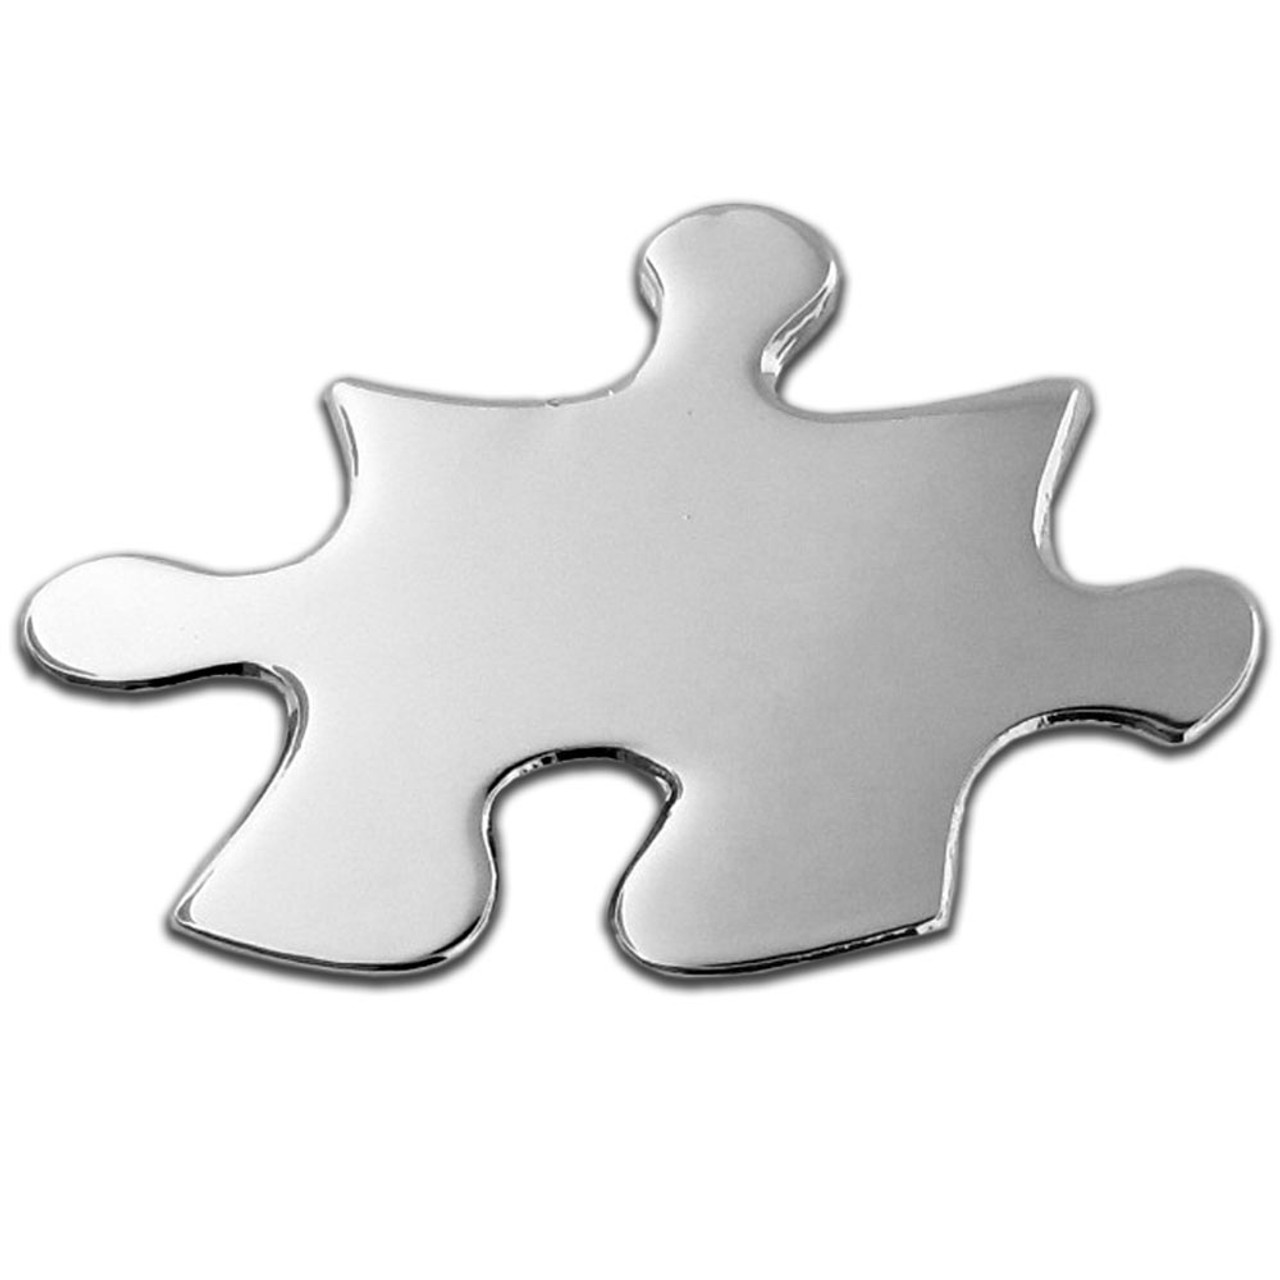 Pin on Jigsaw Puzzle